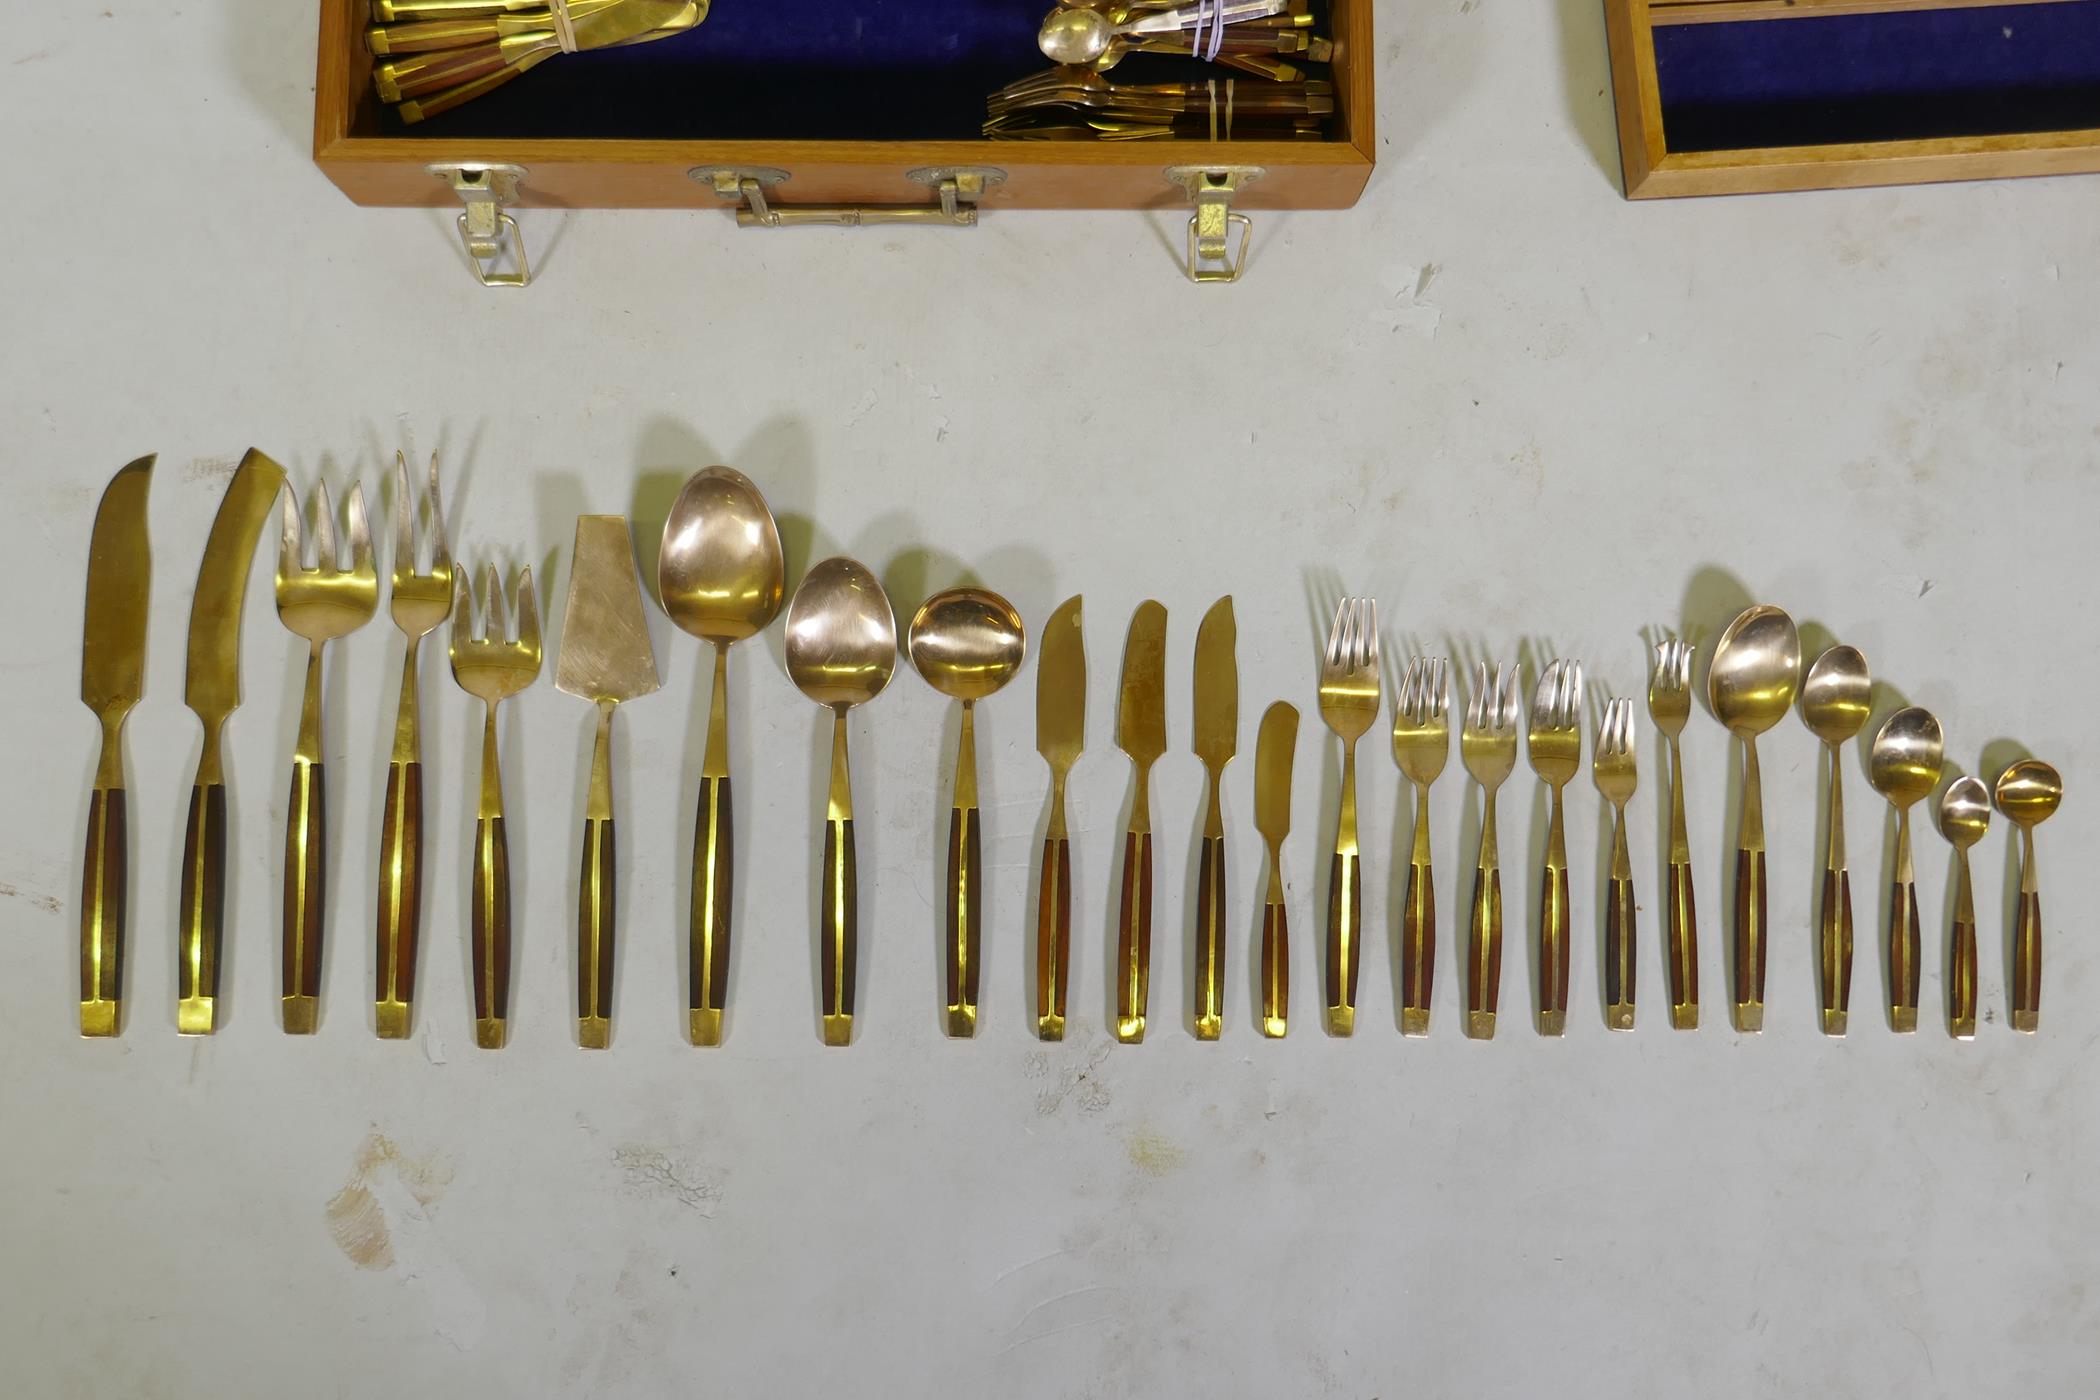 A canteen of brass and rosewood cutlery, probably Thai or Malaysian, 12 place settings - Image 4 of 7